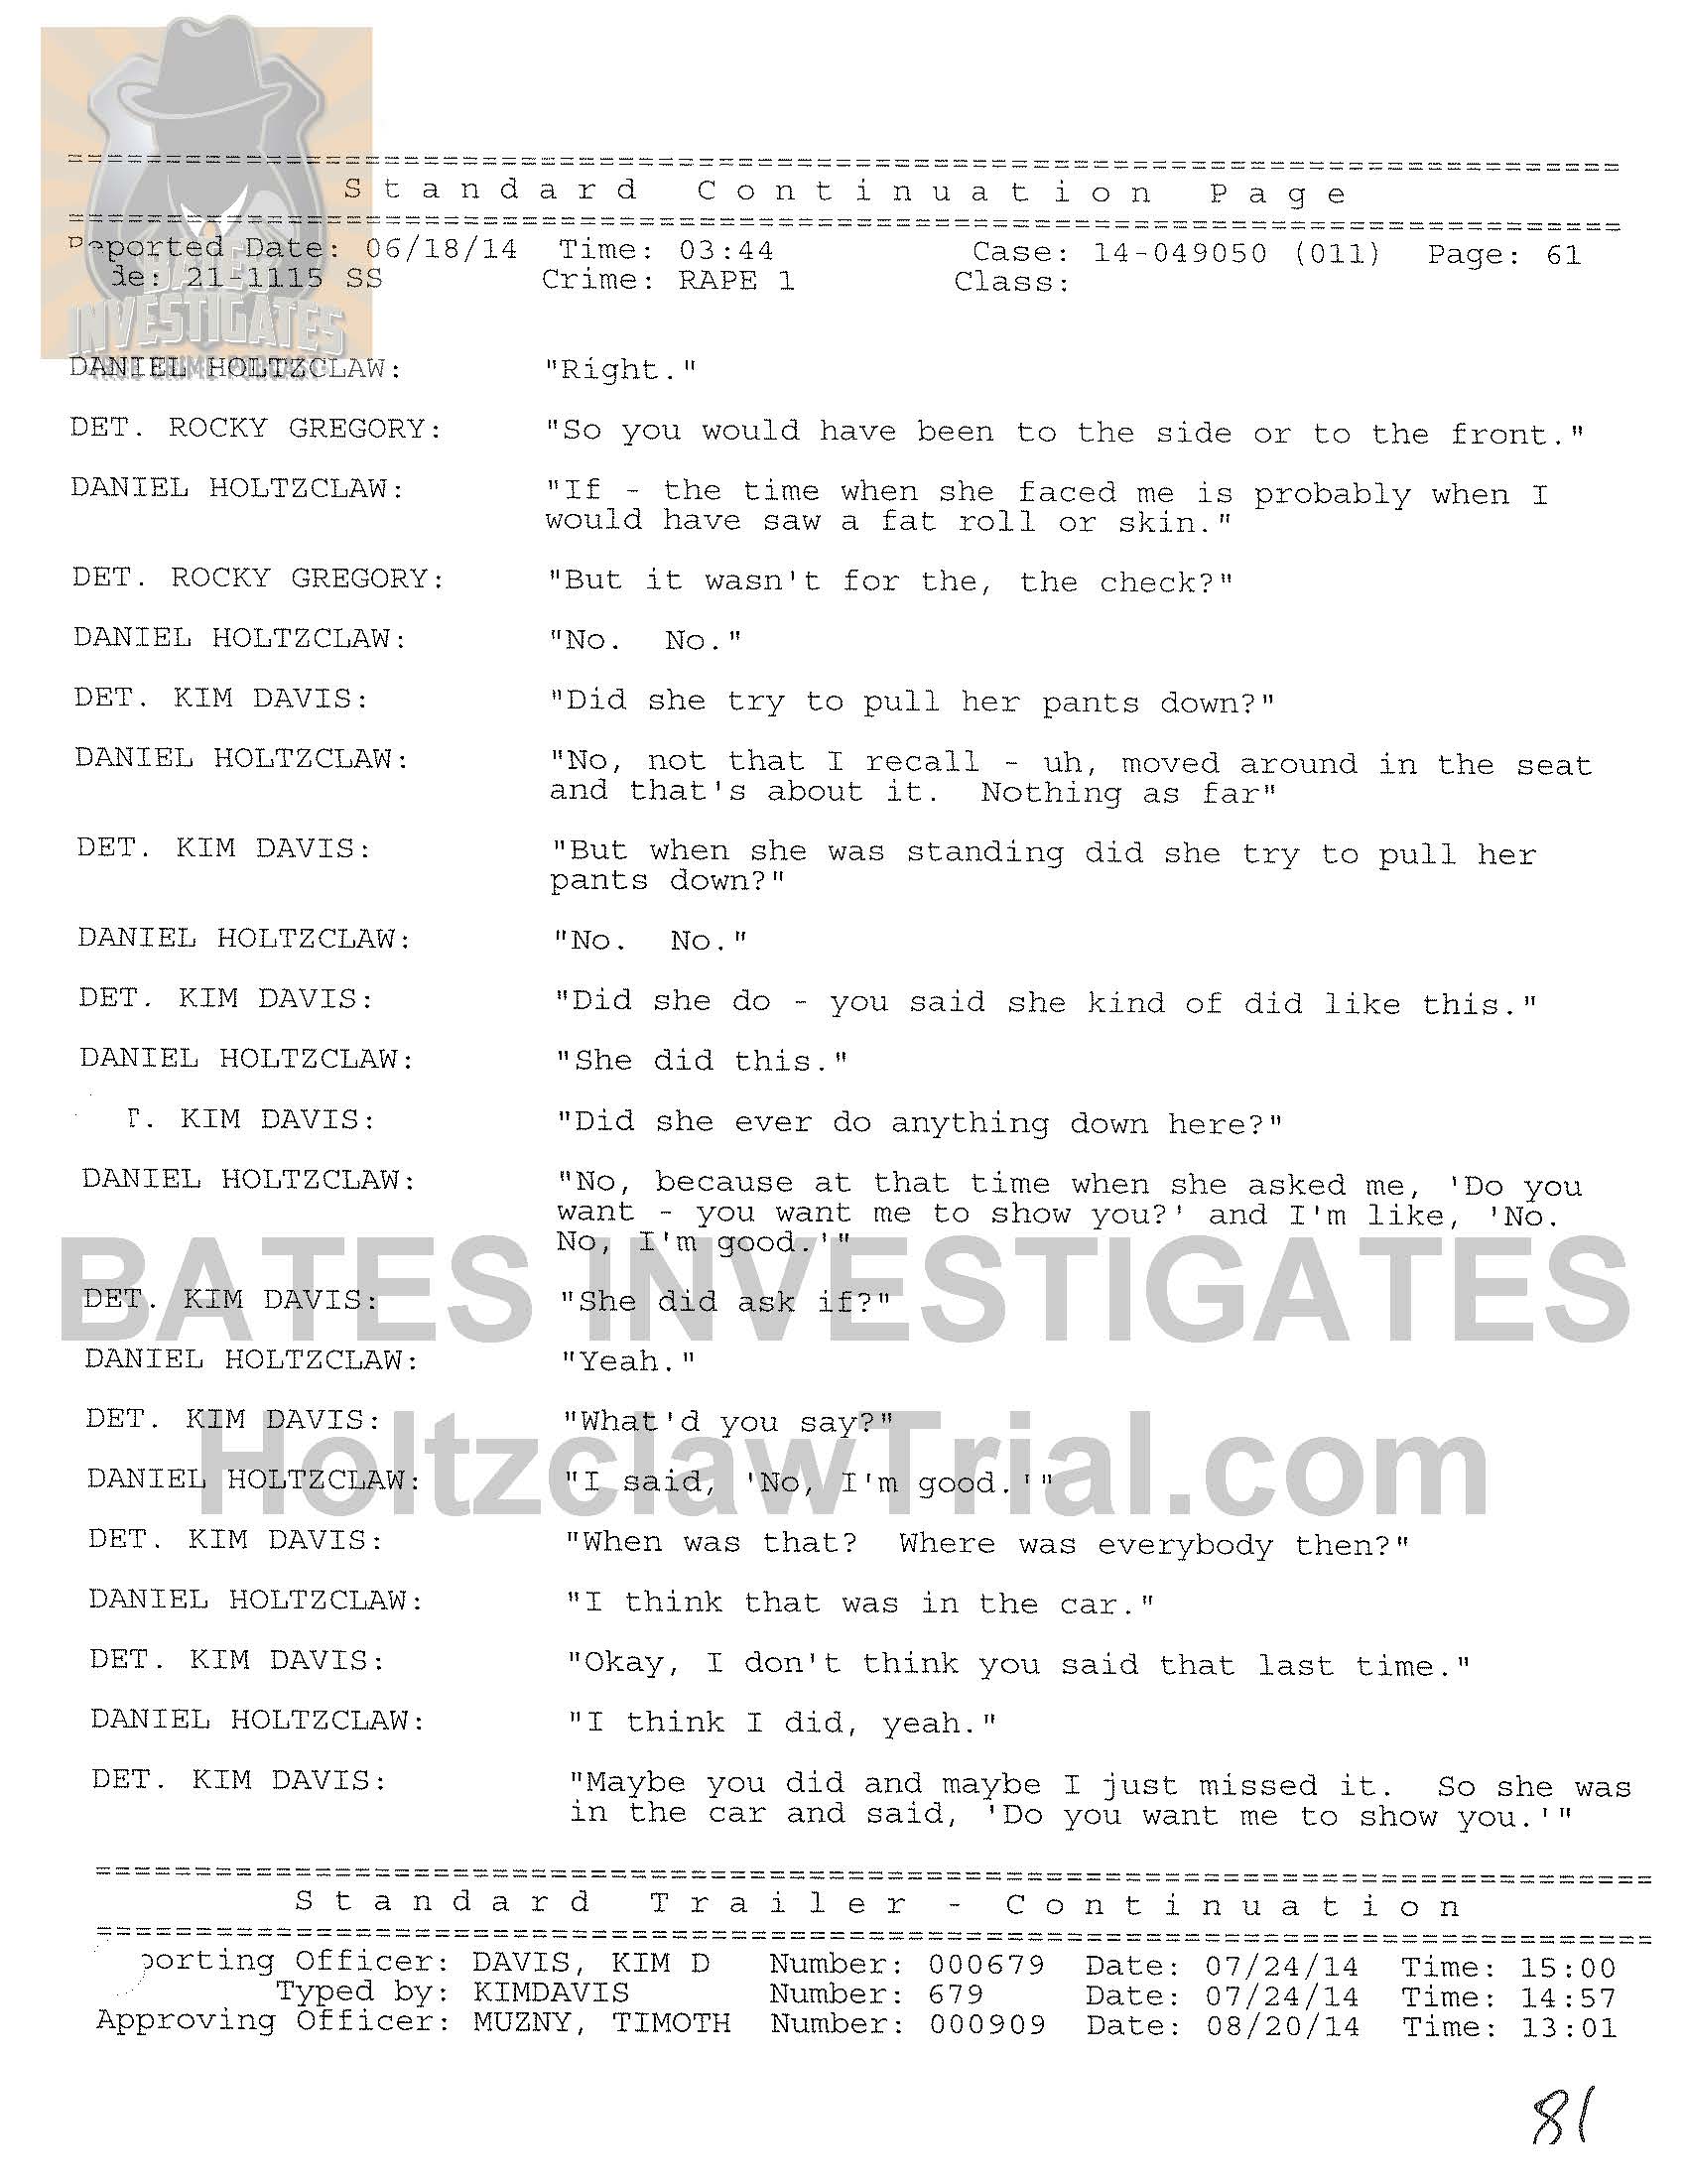 Holtzclaw Interrogation Transcript - Ep02 Redacted_Page_61.jpg